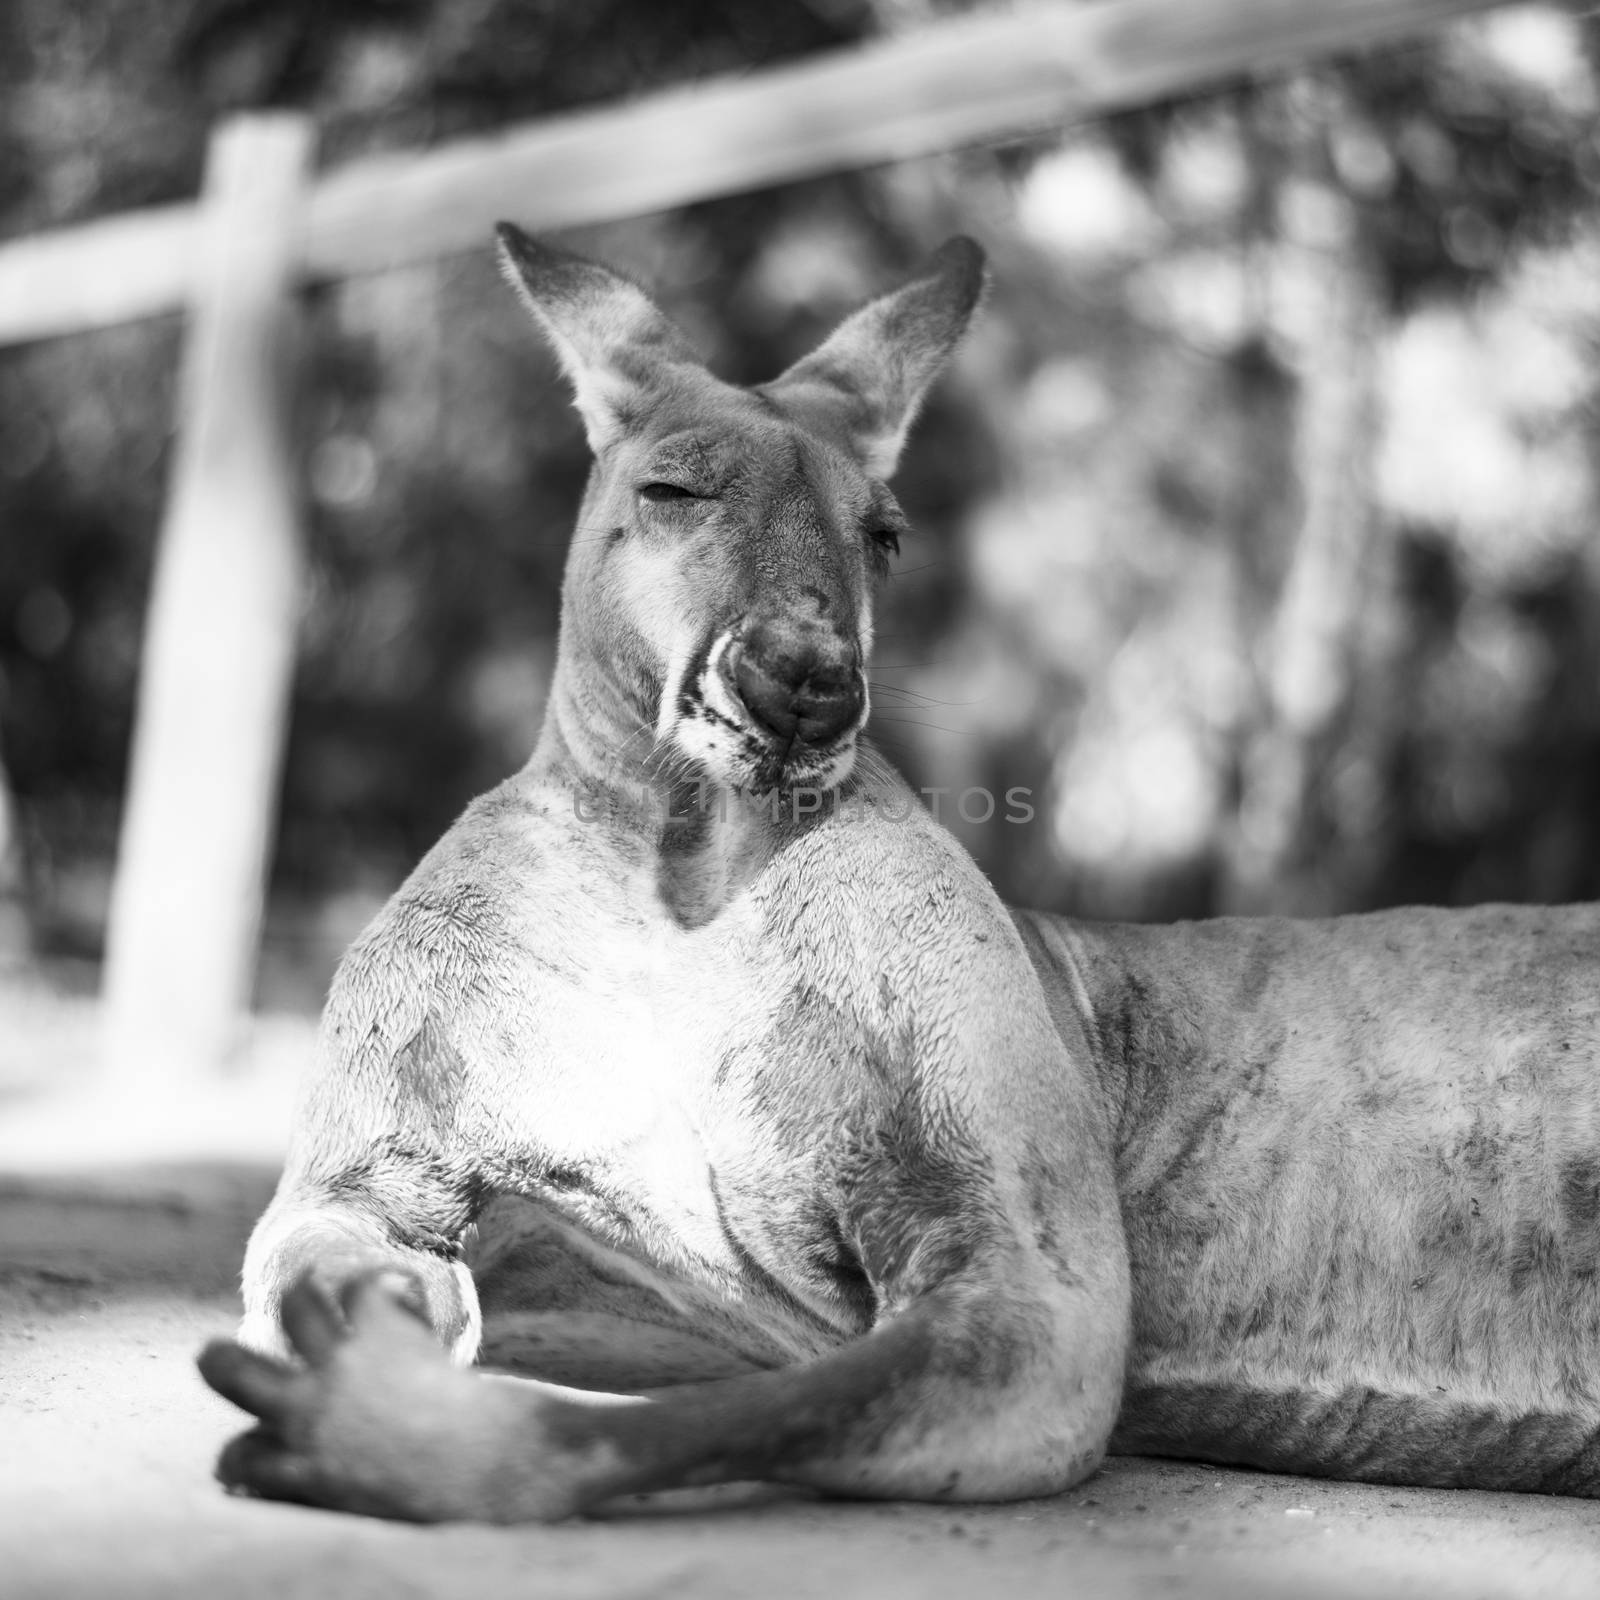 Kangaroo outside during the day. by artistrobd